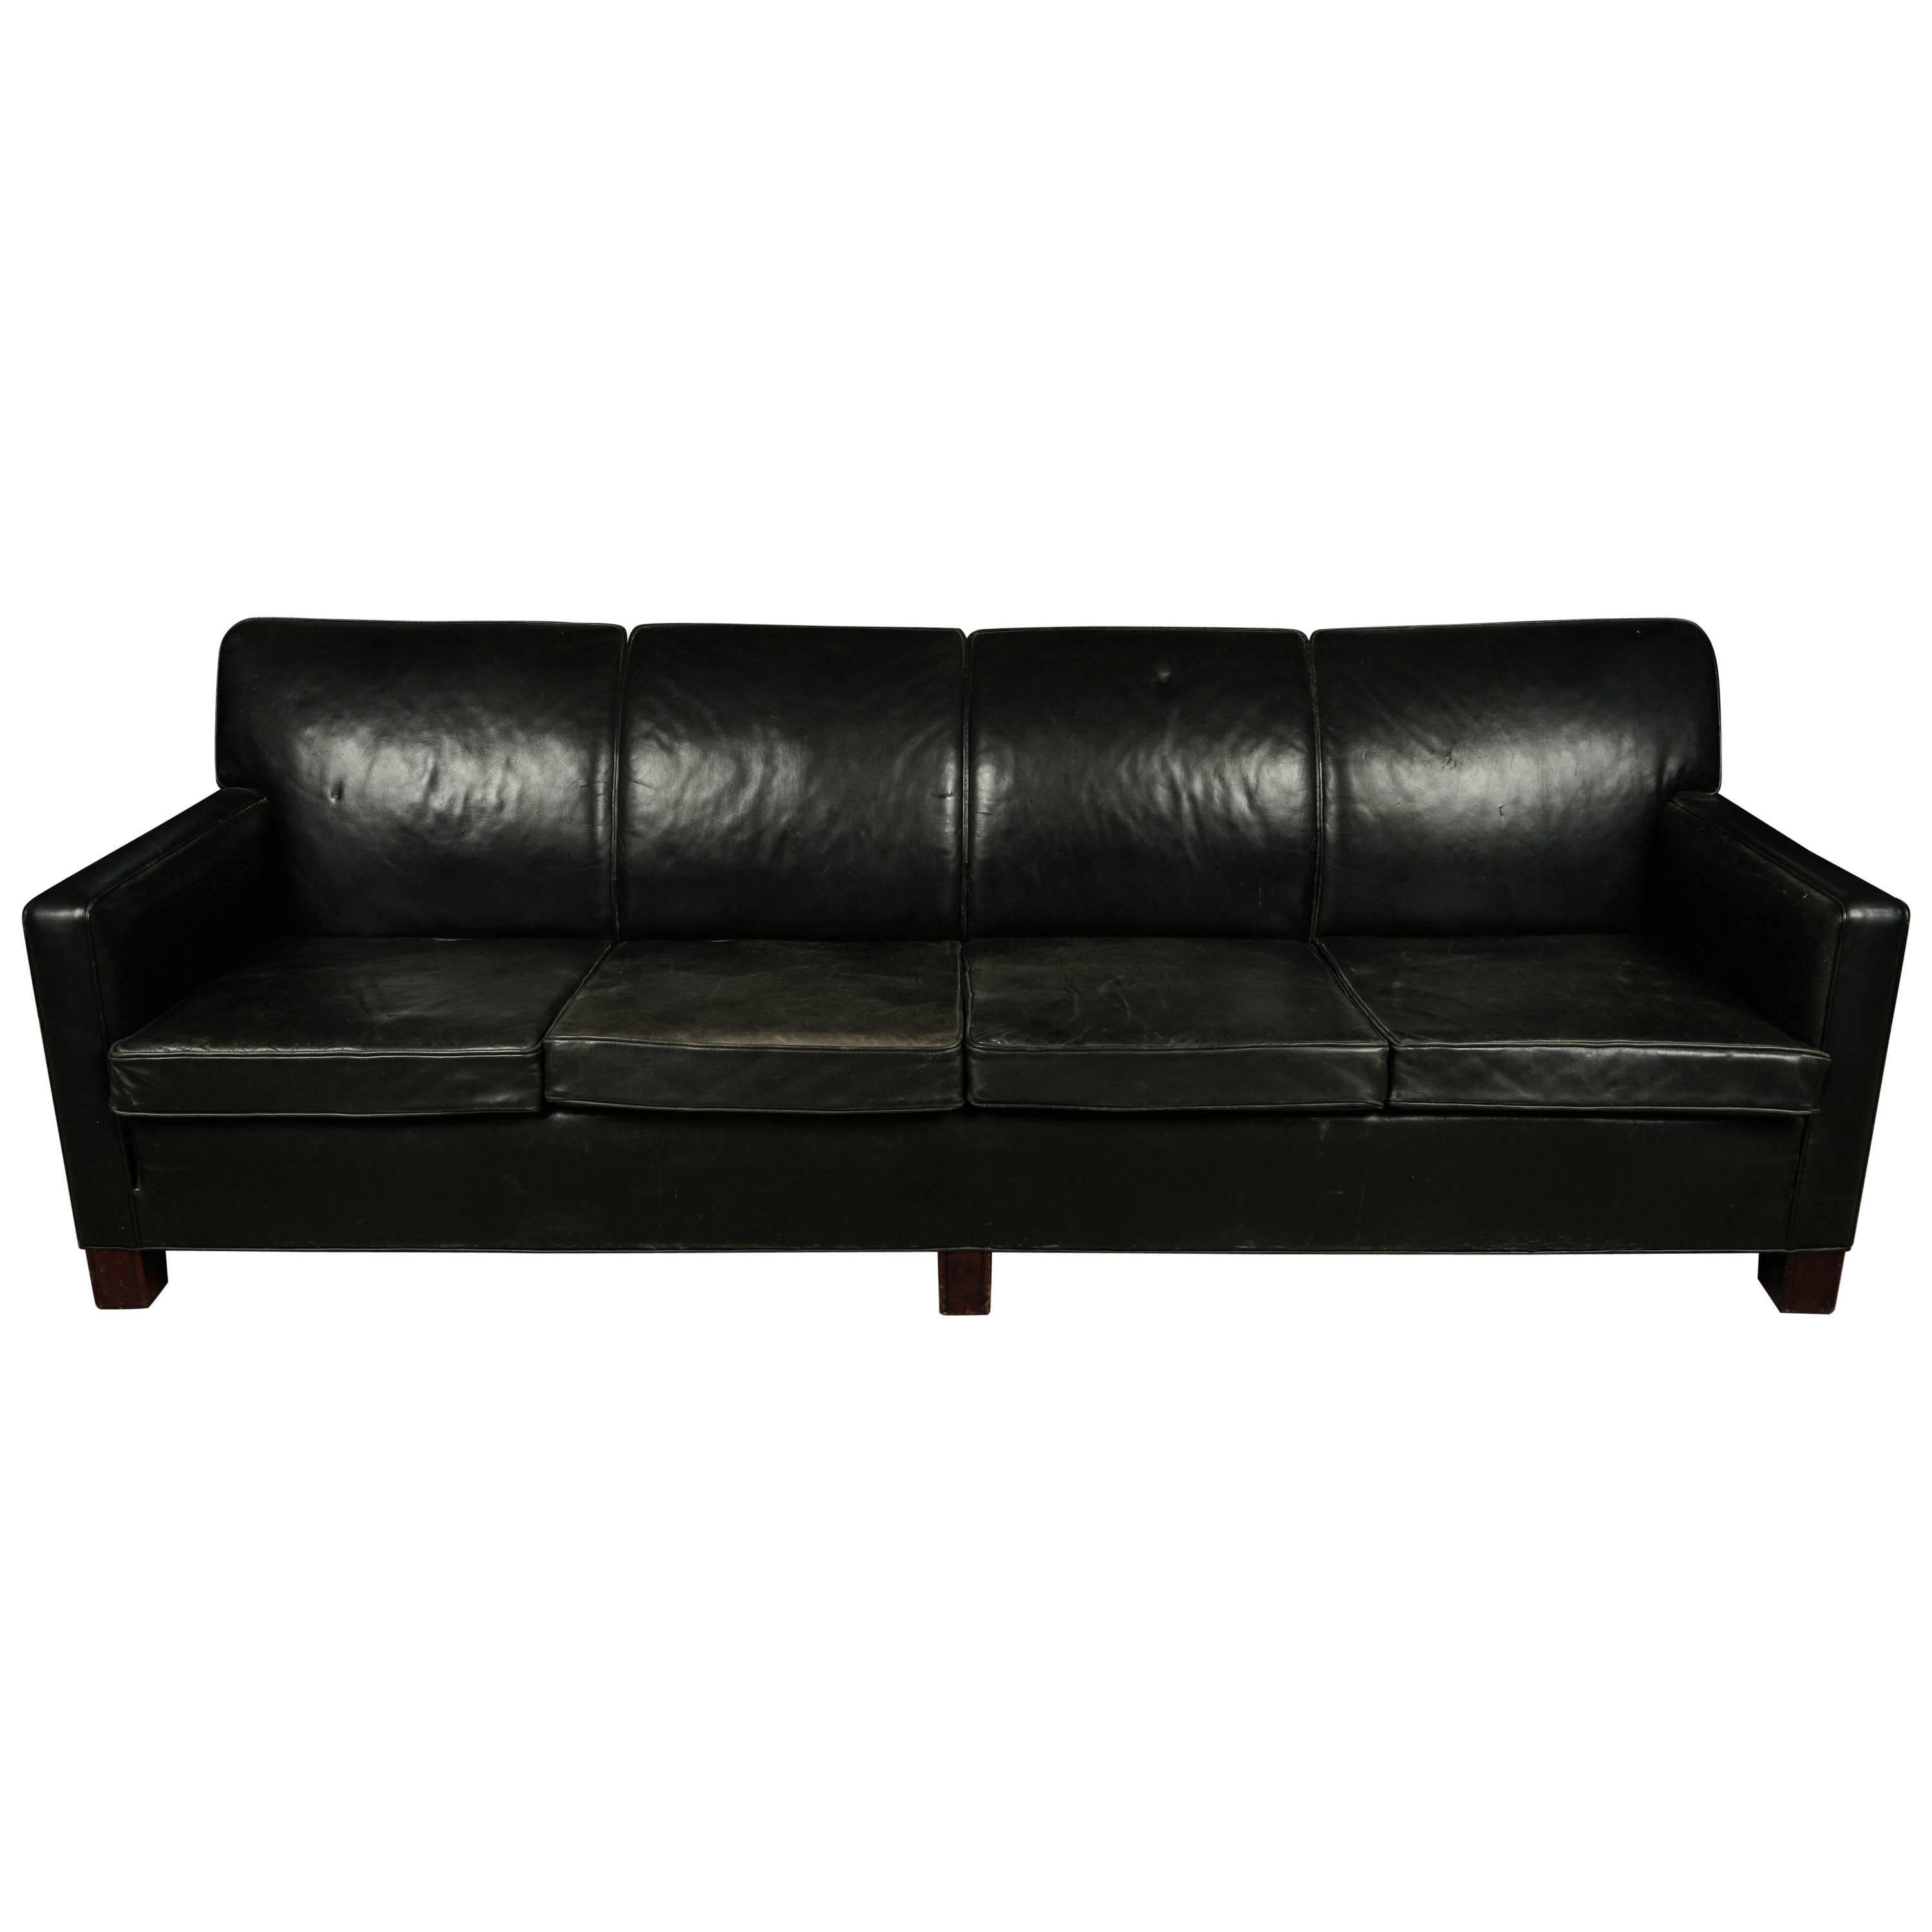 Large Four-Seat Leather Sofa from Denmark, circa 1950